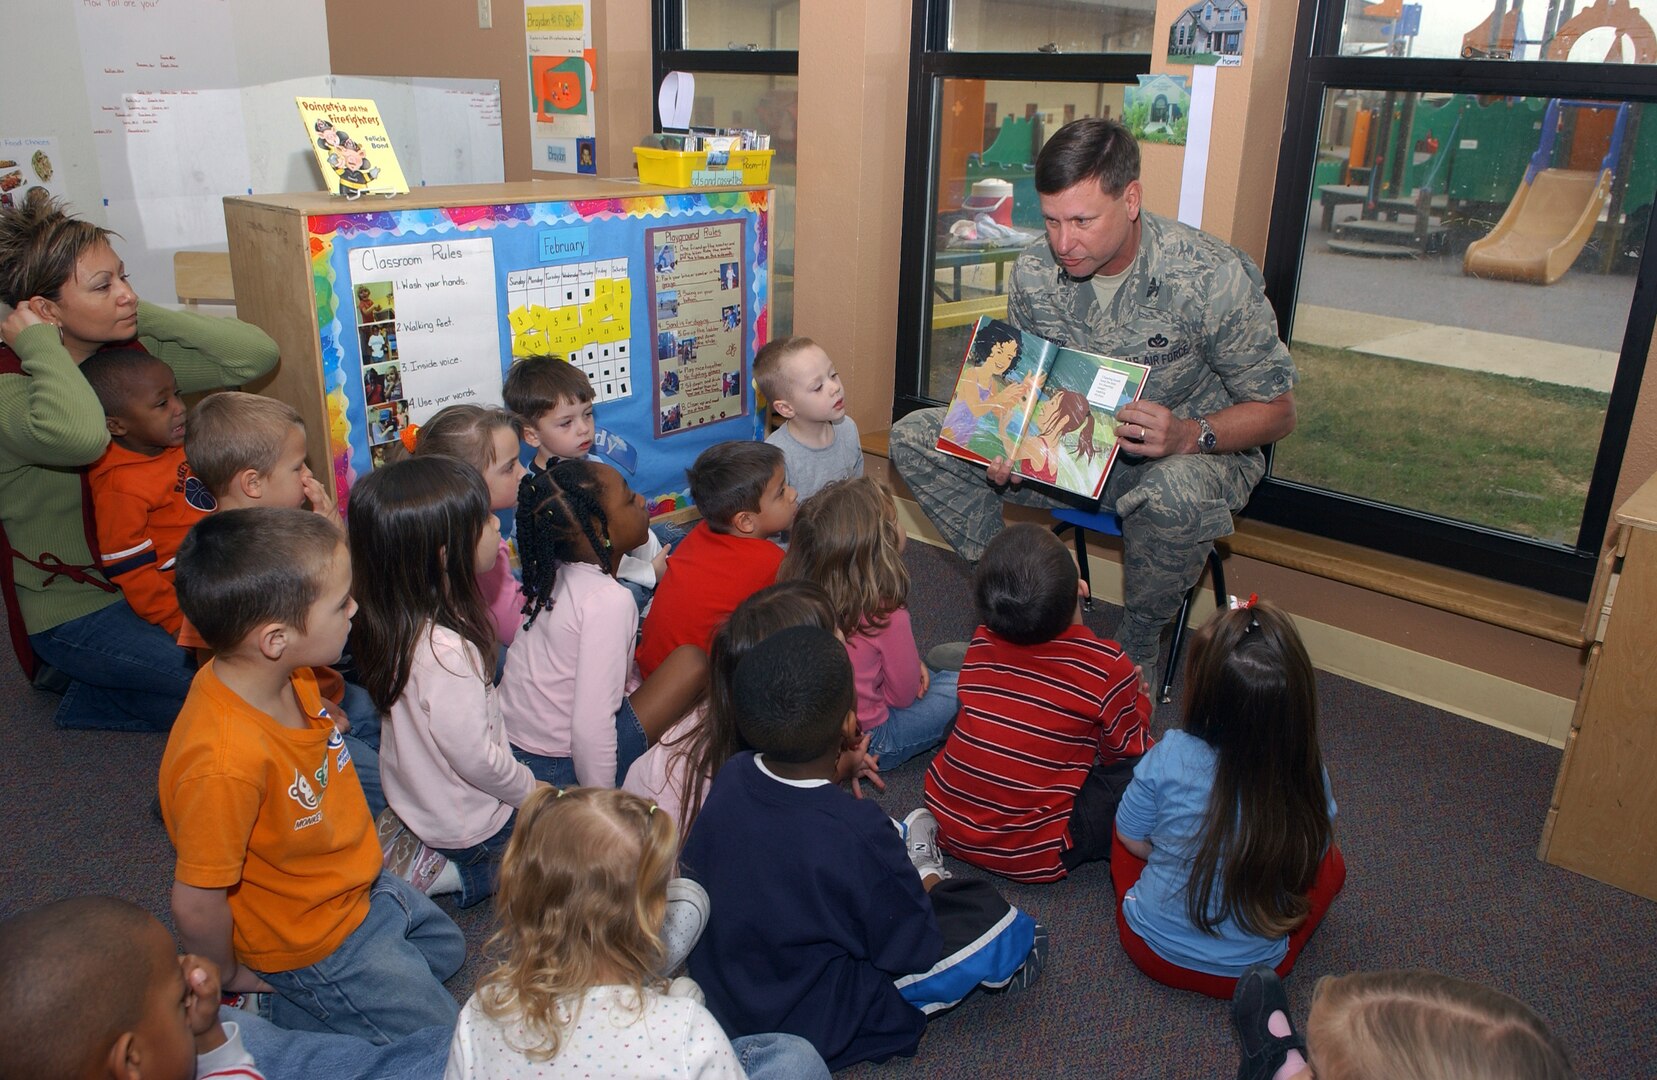 Brig. Gen. Len Patrick, 37th Training Wing commander, reads the book "Hands!" to a group of children at the Lackland Child Development Center on Feb. 19. The event was sponsored by the African American Heritage Committee. (USAF photo by Alan Boedeker)                            